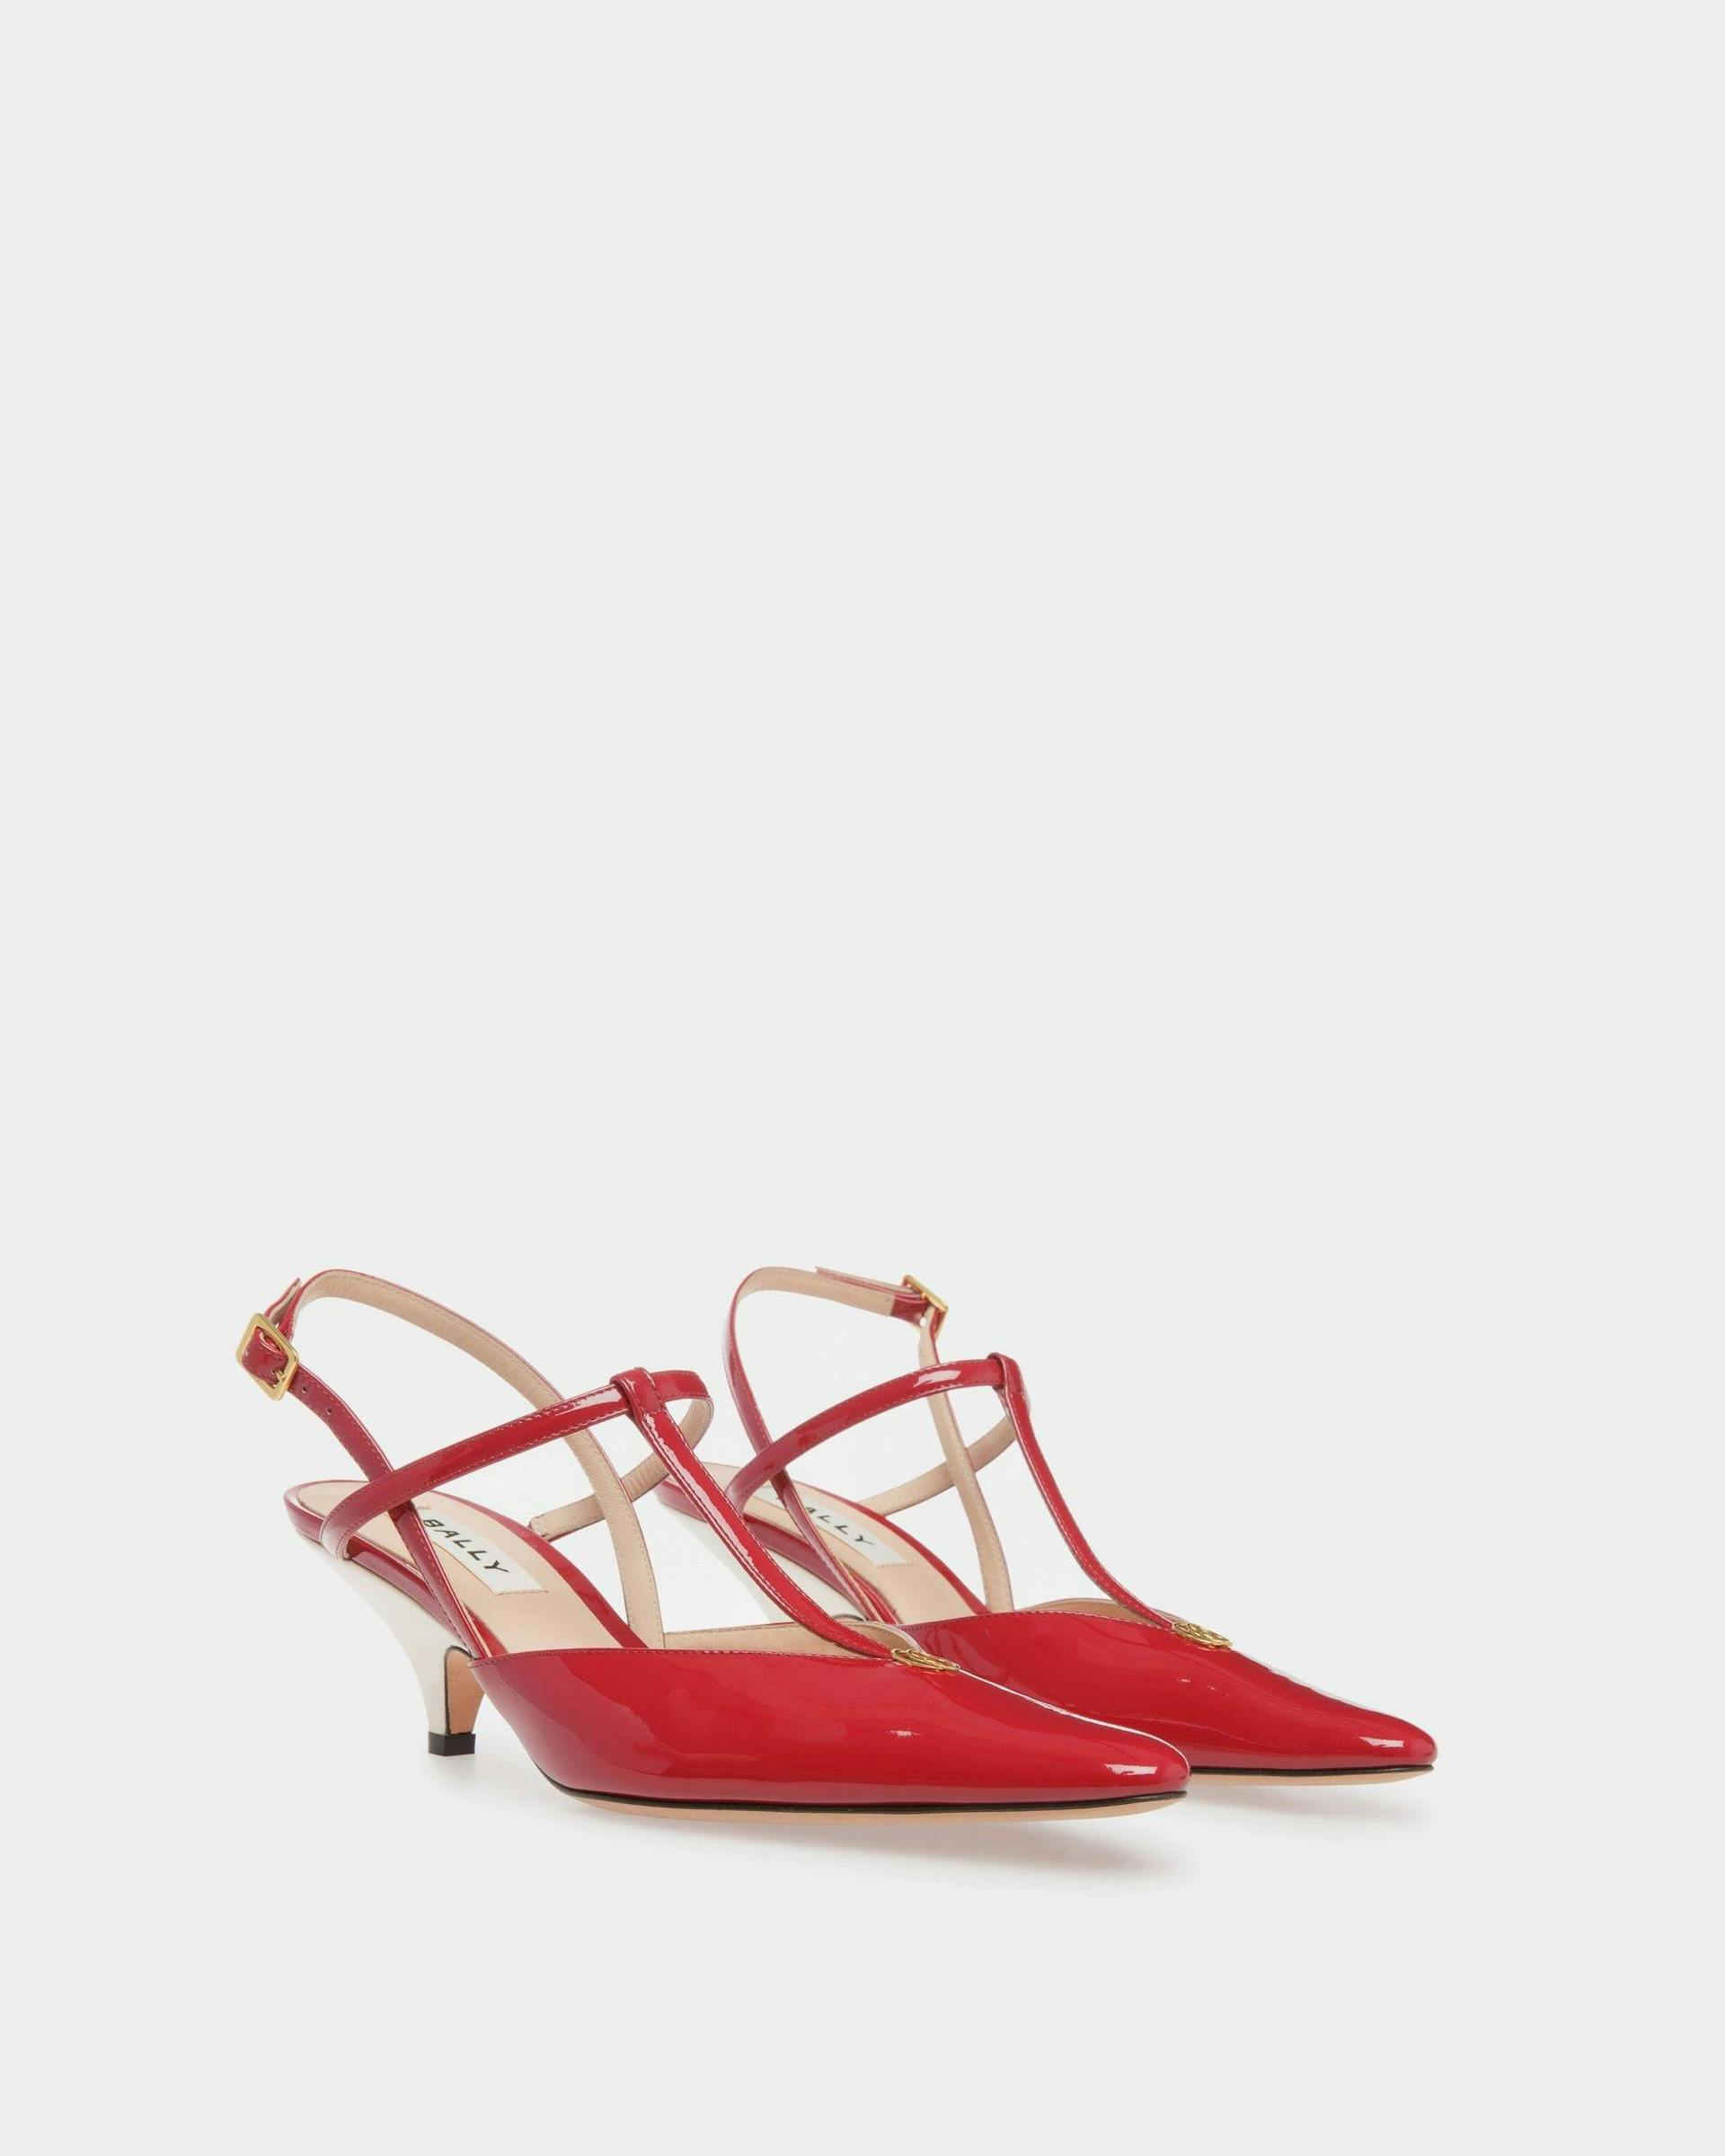 Women's Katy Sling Pump In Ruby Red And Bone Leather | Bally | Still Life 3/4 Front